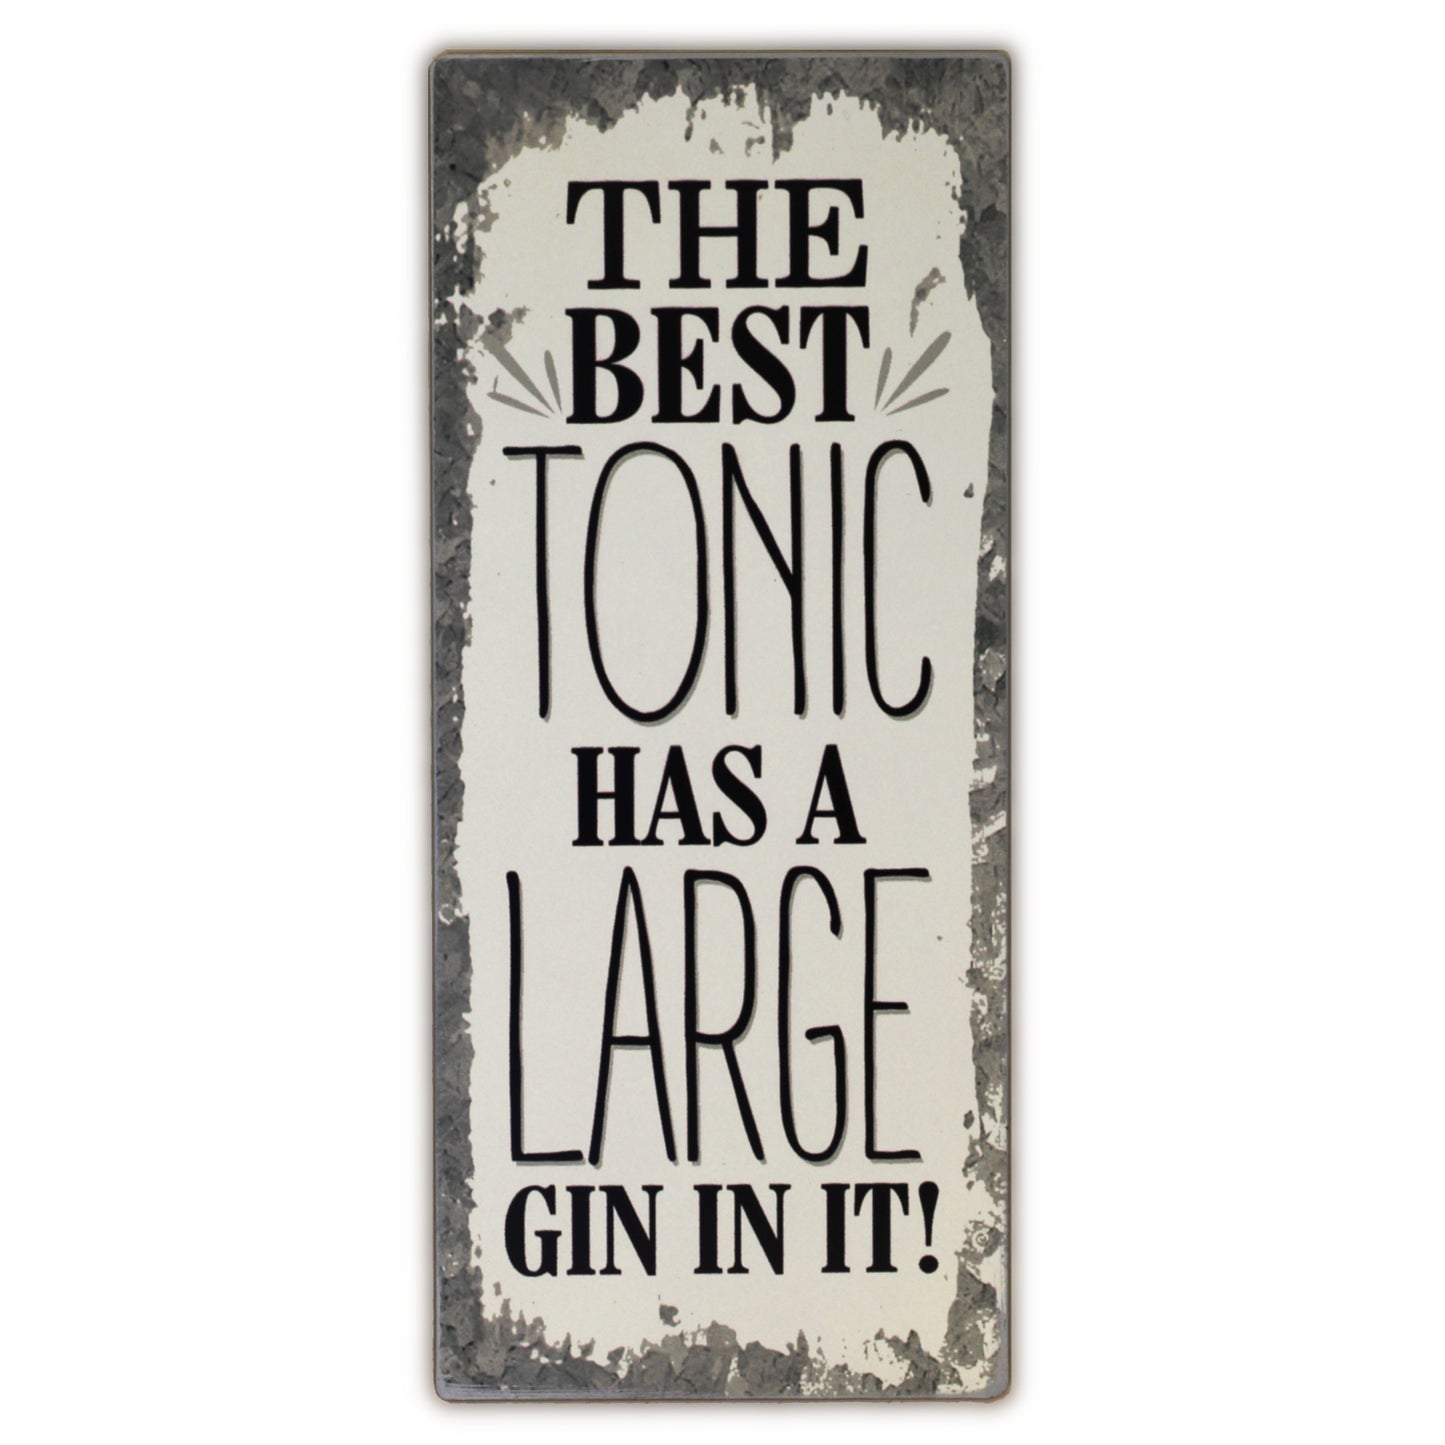 Blechschild: The best tonic has a large gin in it